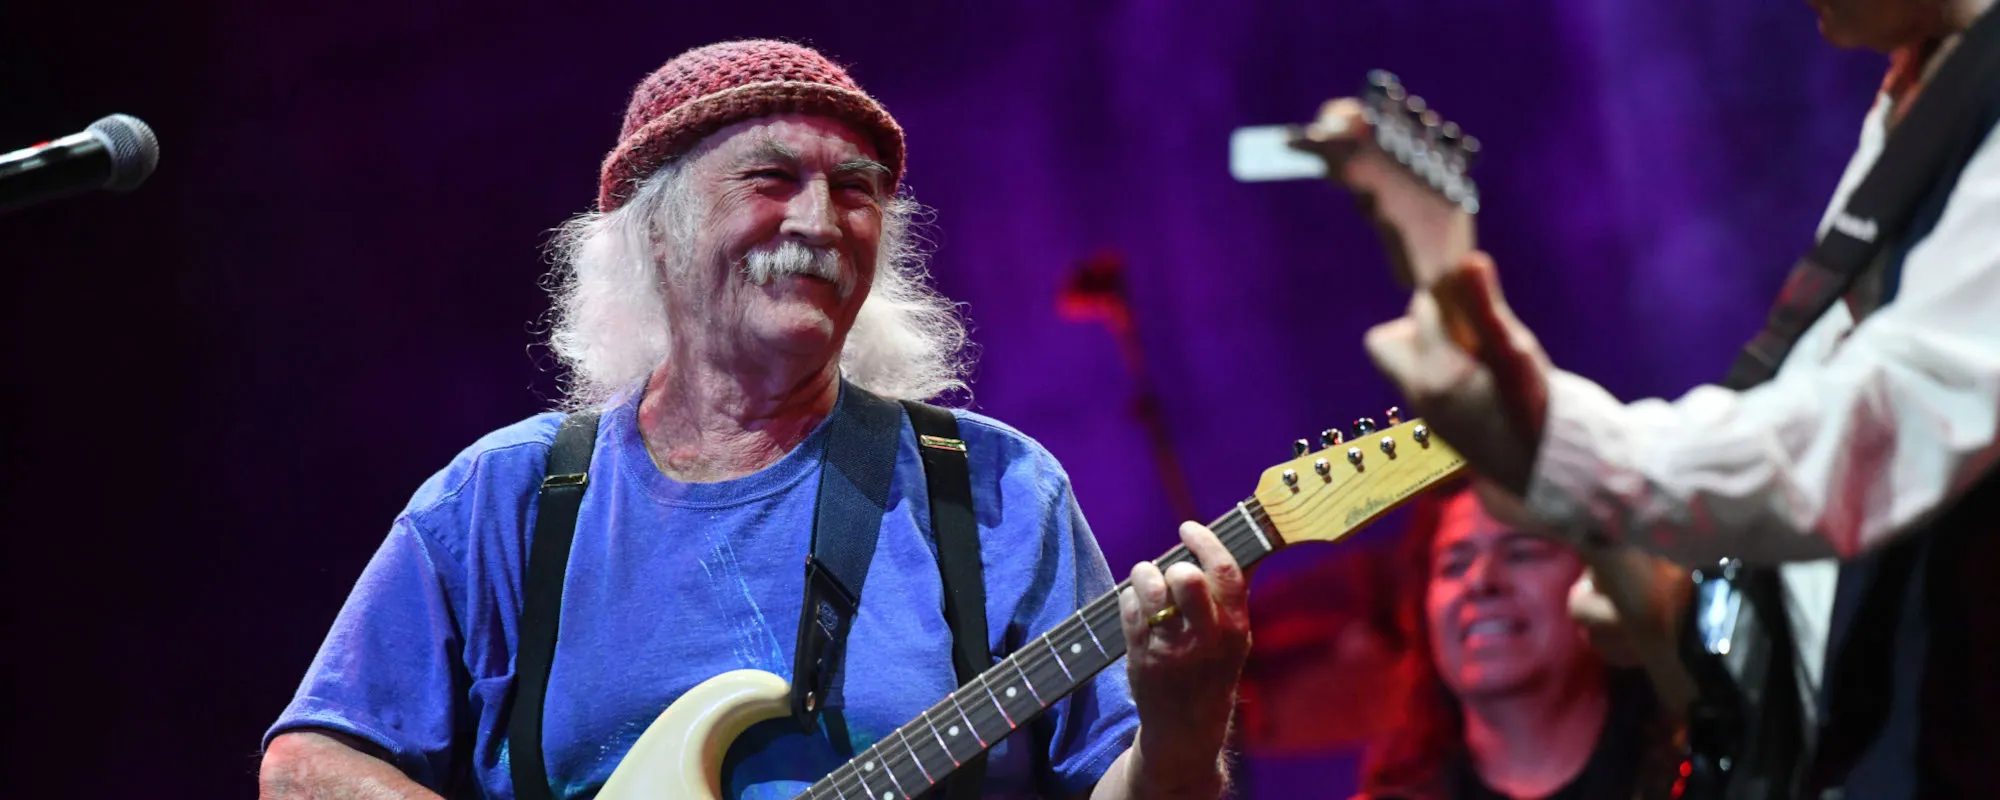 David Crosby Delivers Surprise Performance at Jason Isbell Show